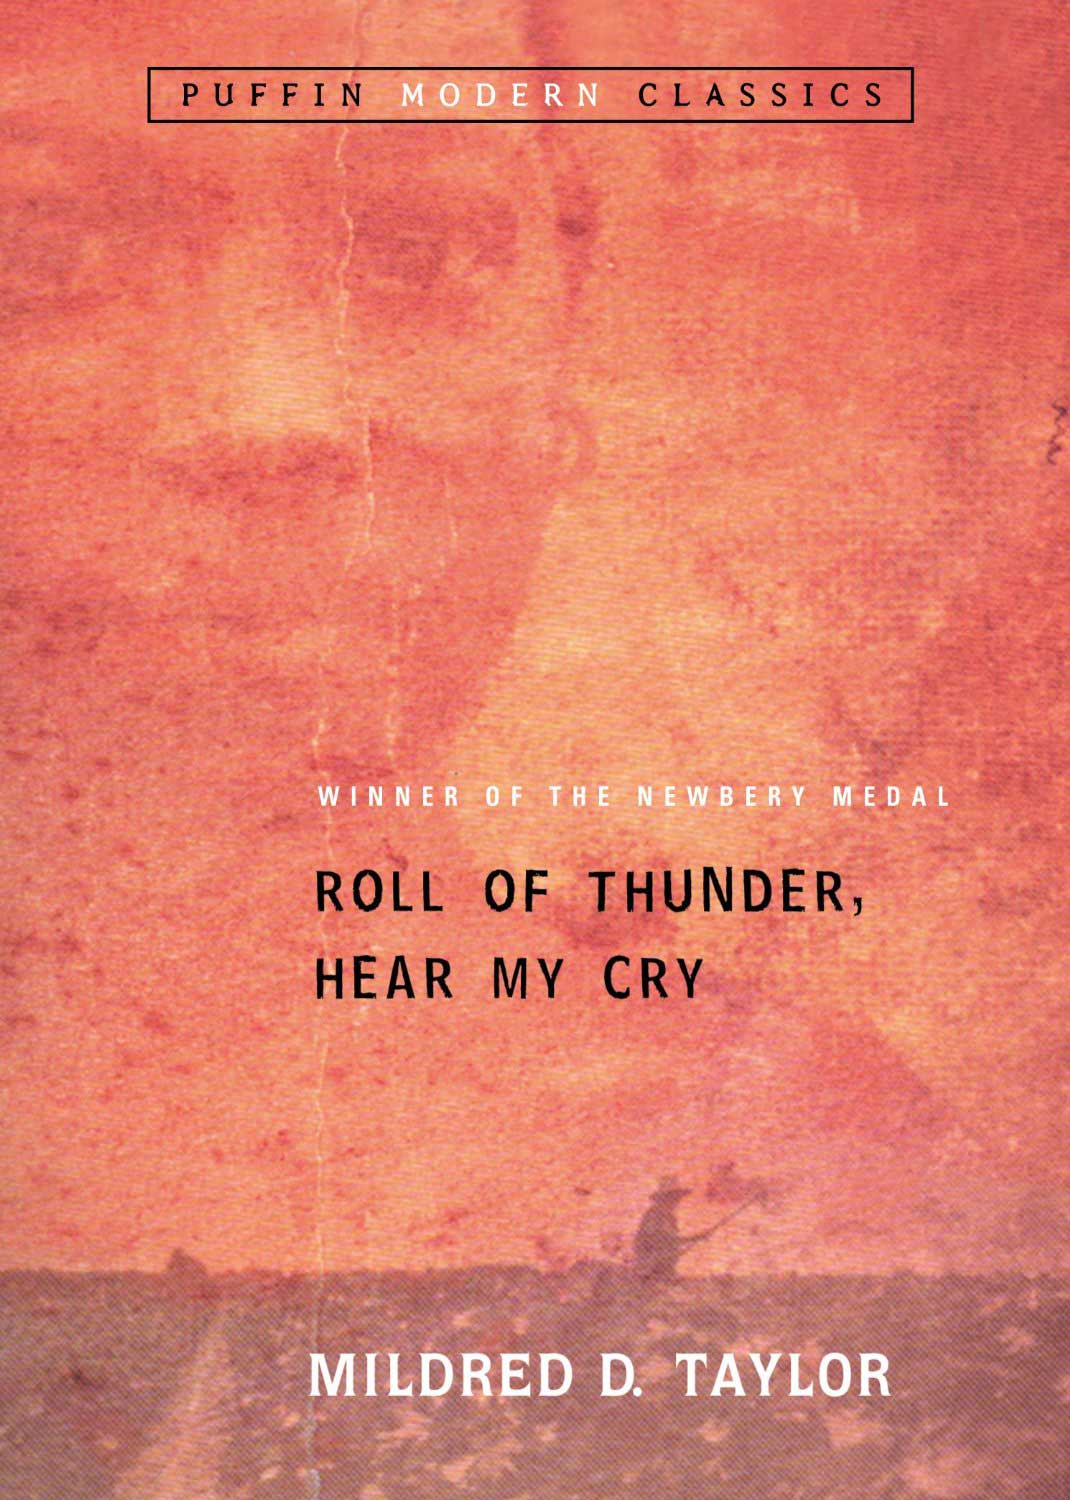 Roll of Thunder, Hear My Cry, by Mildred Taylor. 
                              
                              
                              
                              A black family in the depression era American south grapples with racism.
                              
                              
                              
                              Buy now: Roll of Thunder, Hear My Cry